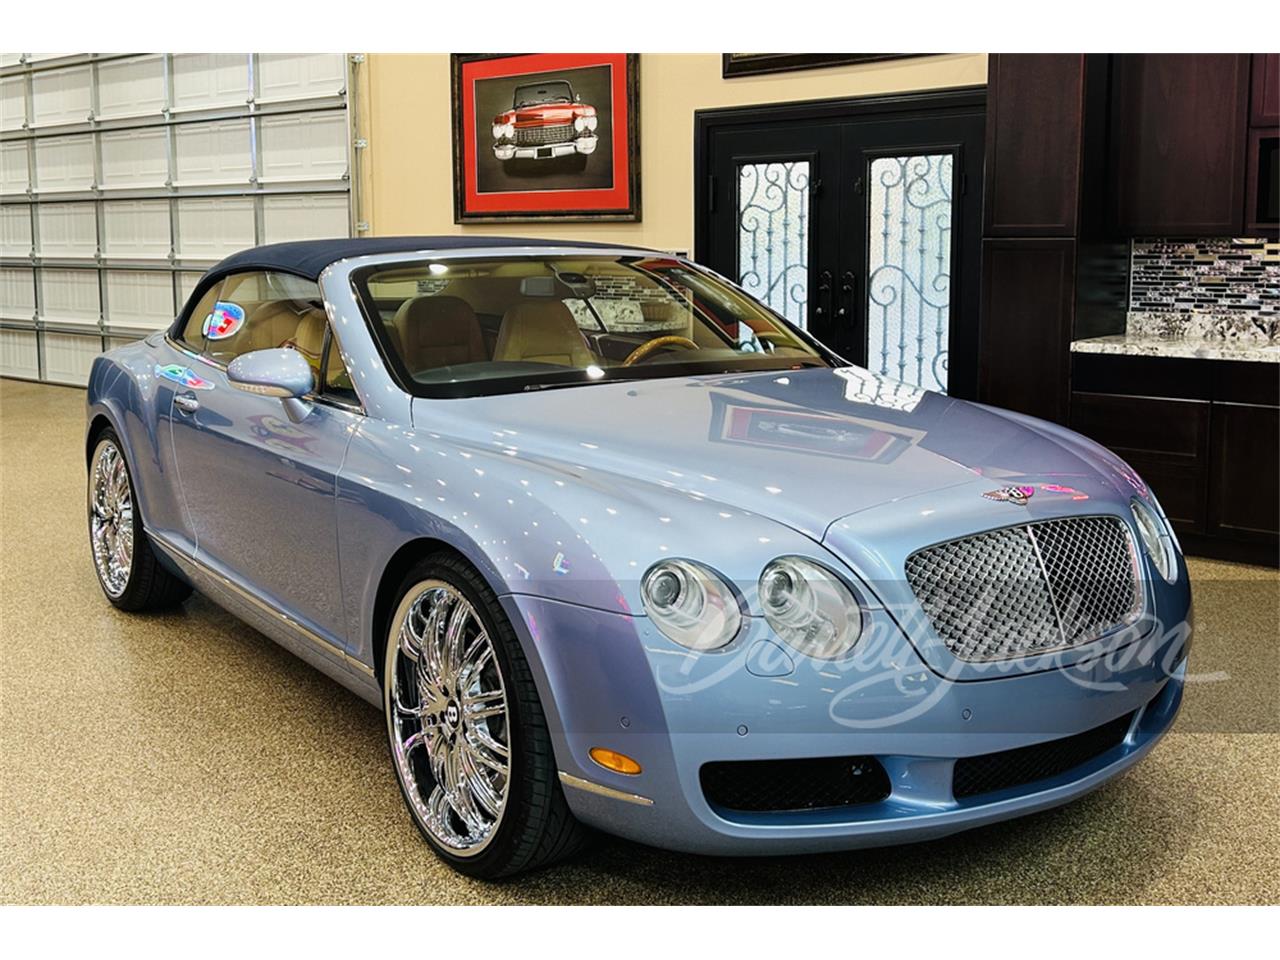 For Sale at Auction: 2007 Bentley Continental GTC in Las Vegas, Nevada for sale in Las Vegas, NV